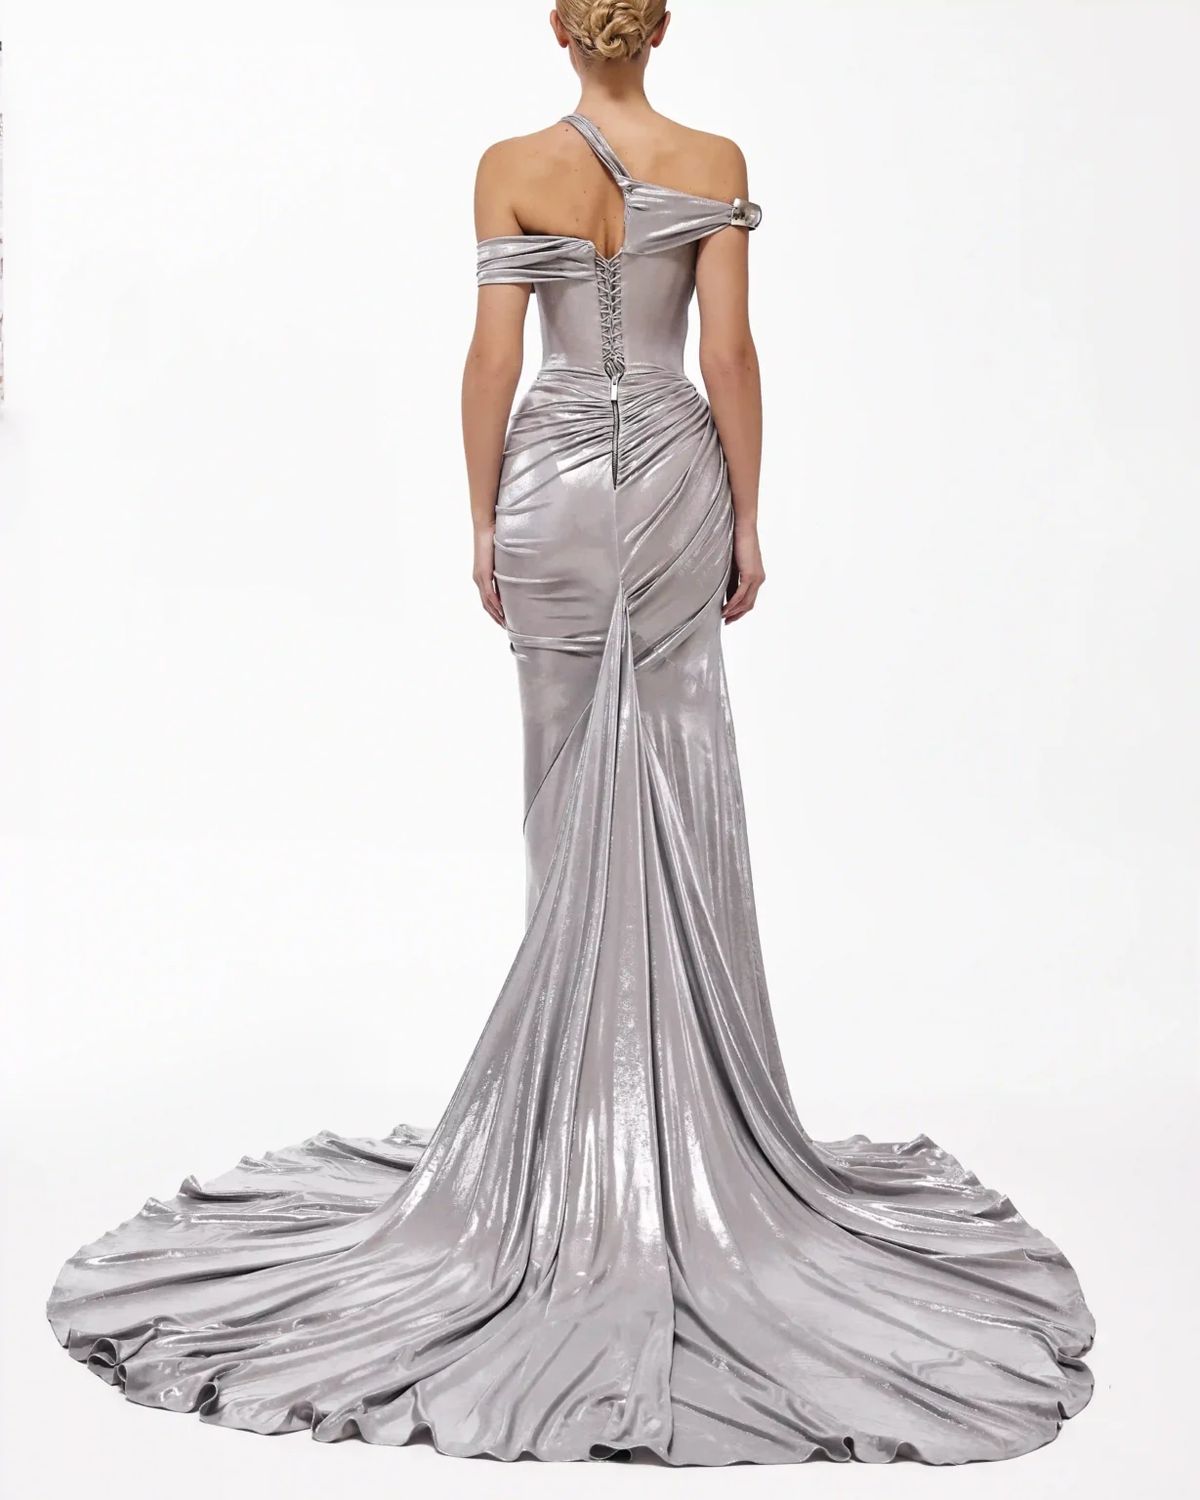 Style metallic-majesty-24-3 Valdrin Sahiti Size L Pageant Silver Side Slit Dress on Queenly